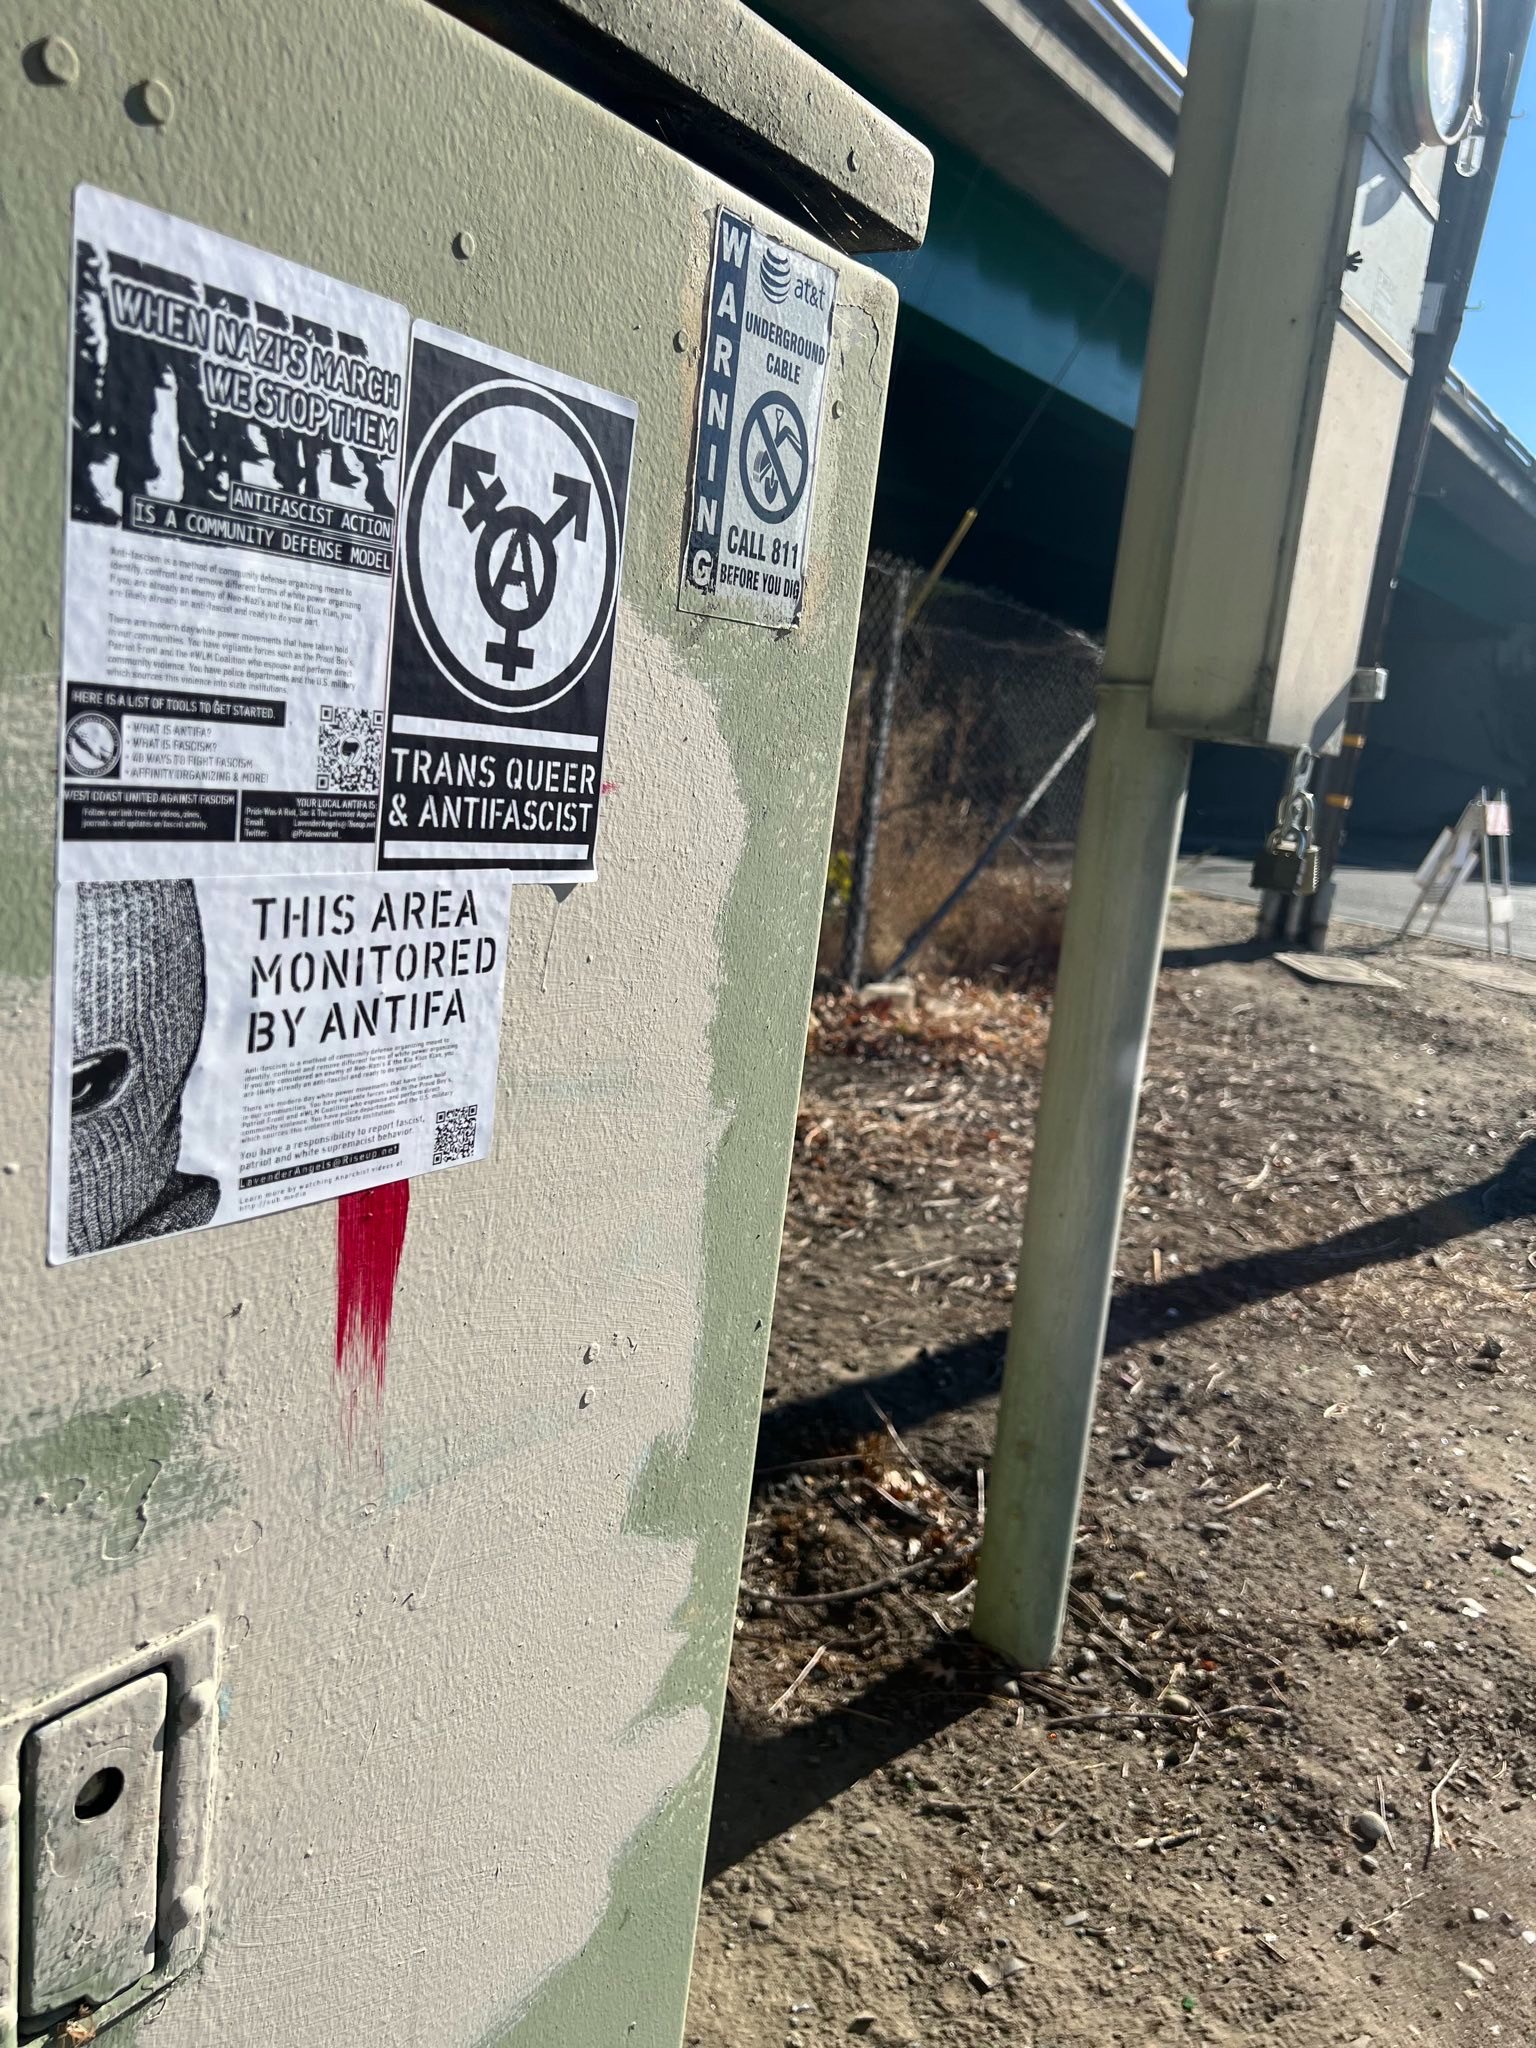 A green electric box with a white supremacist symbol on it has been covered up with antifascist stickers under a nearby overpass.